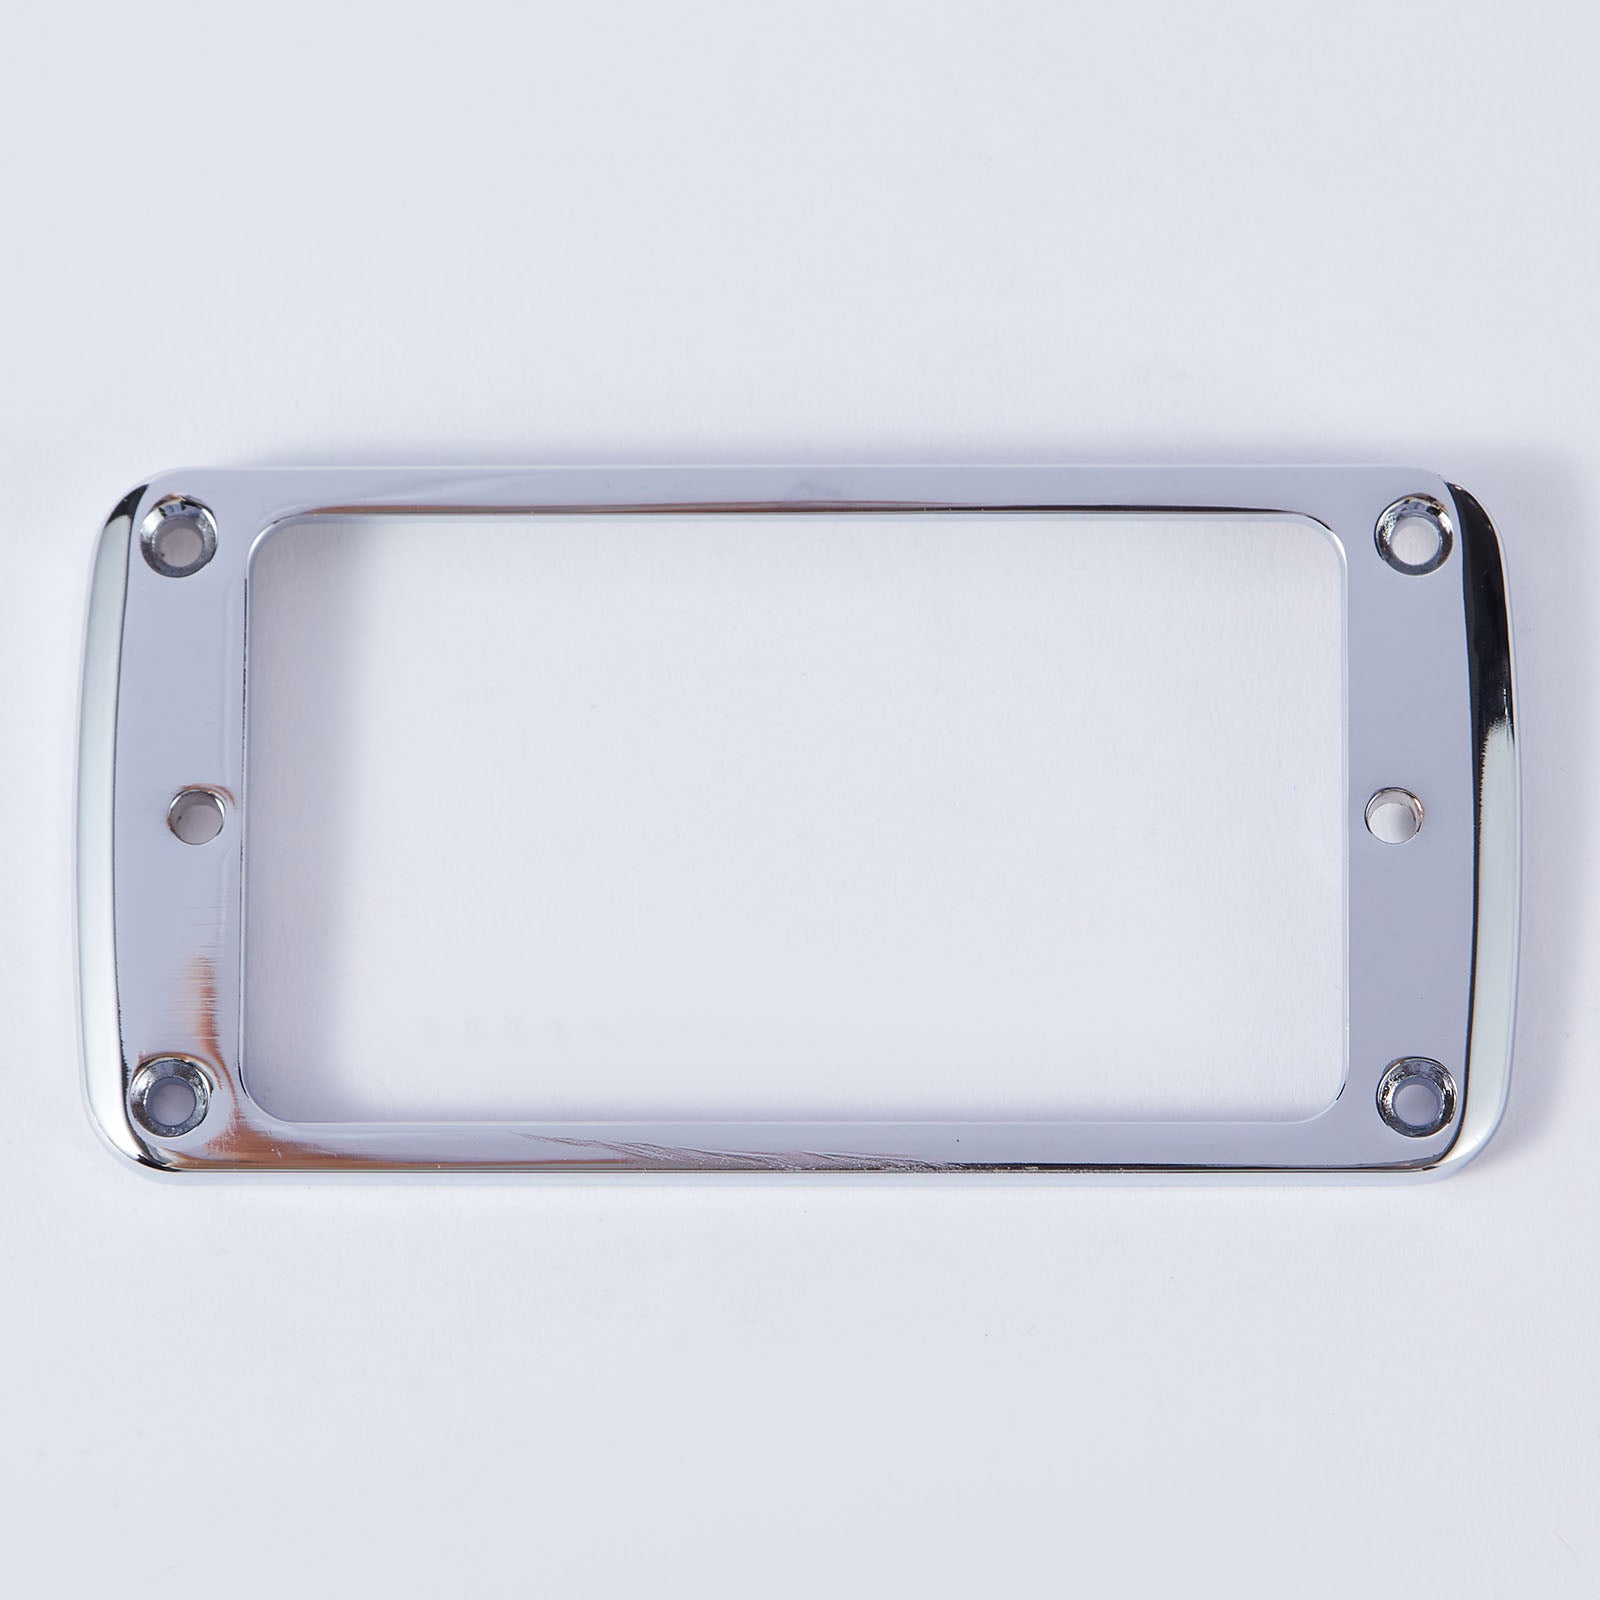 A durable and versatile pickup frame designed to accommodate different electric guitar models.